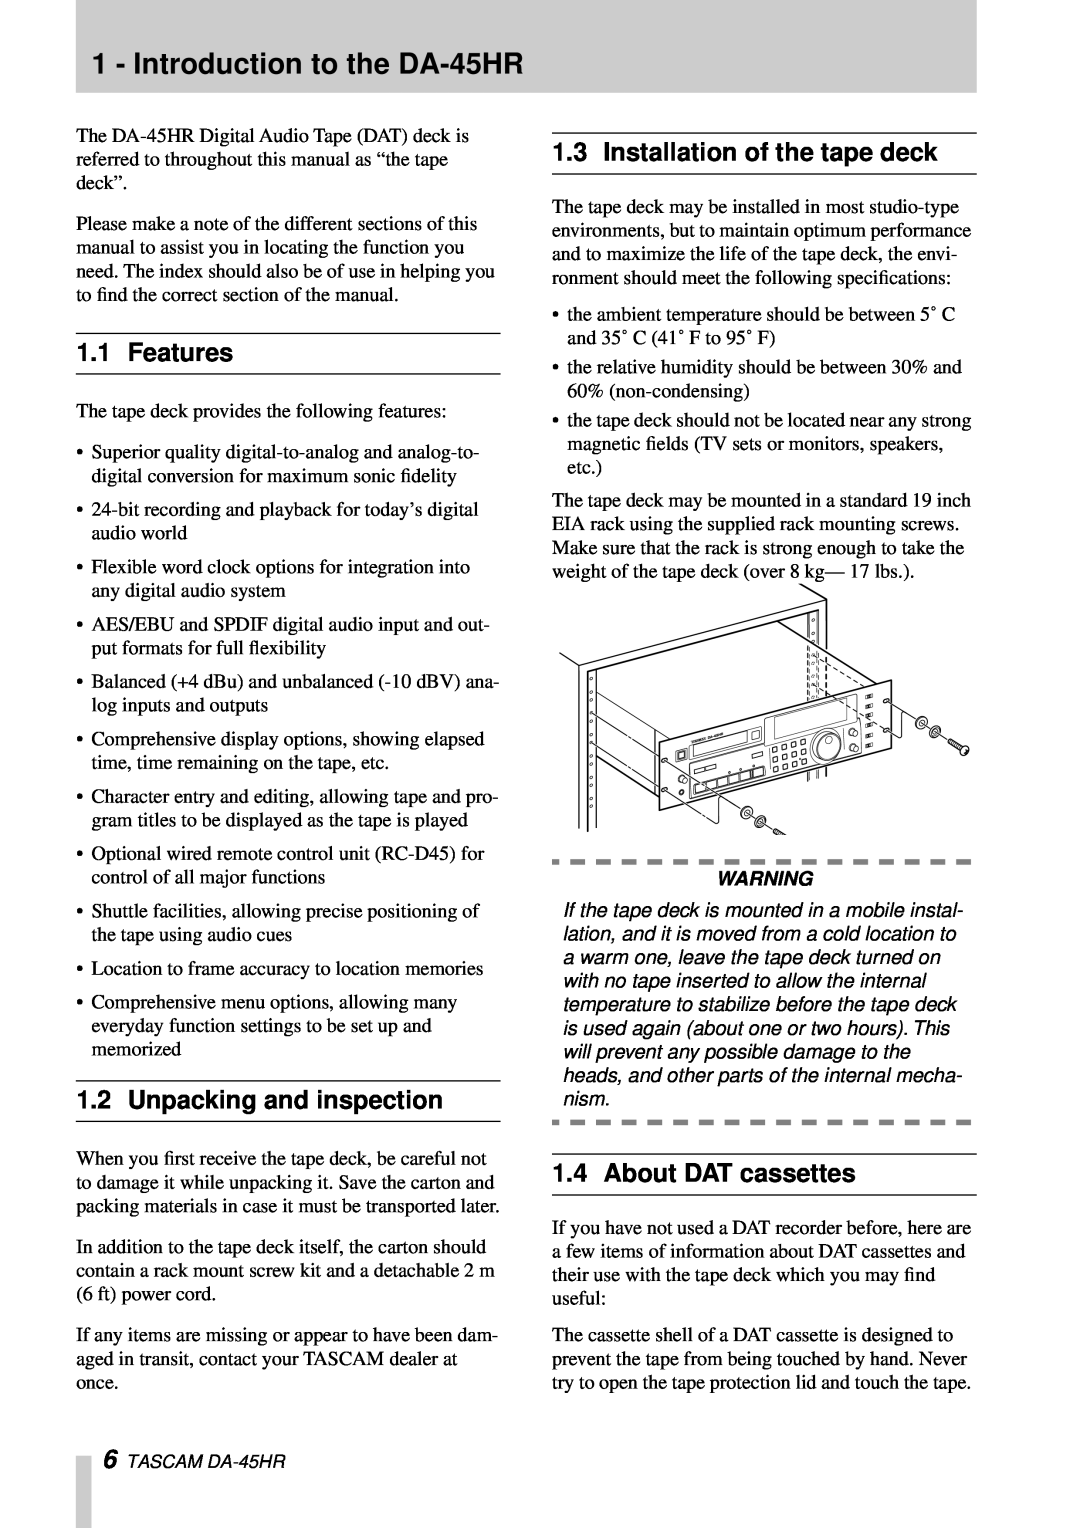 Tascam owner manual Introduction to the DA-45HR, Features, Unpacking and inspection, Installation of the tape deck 